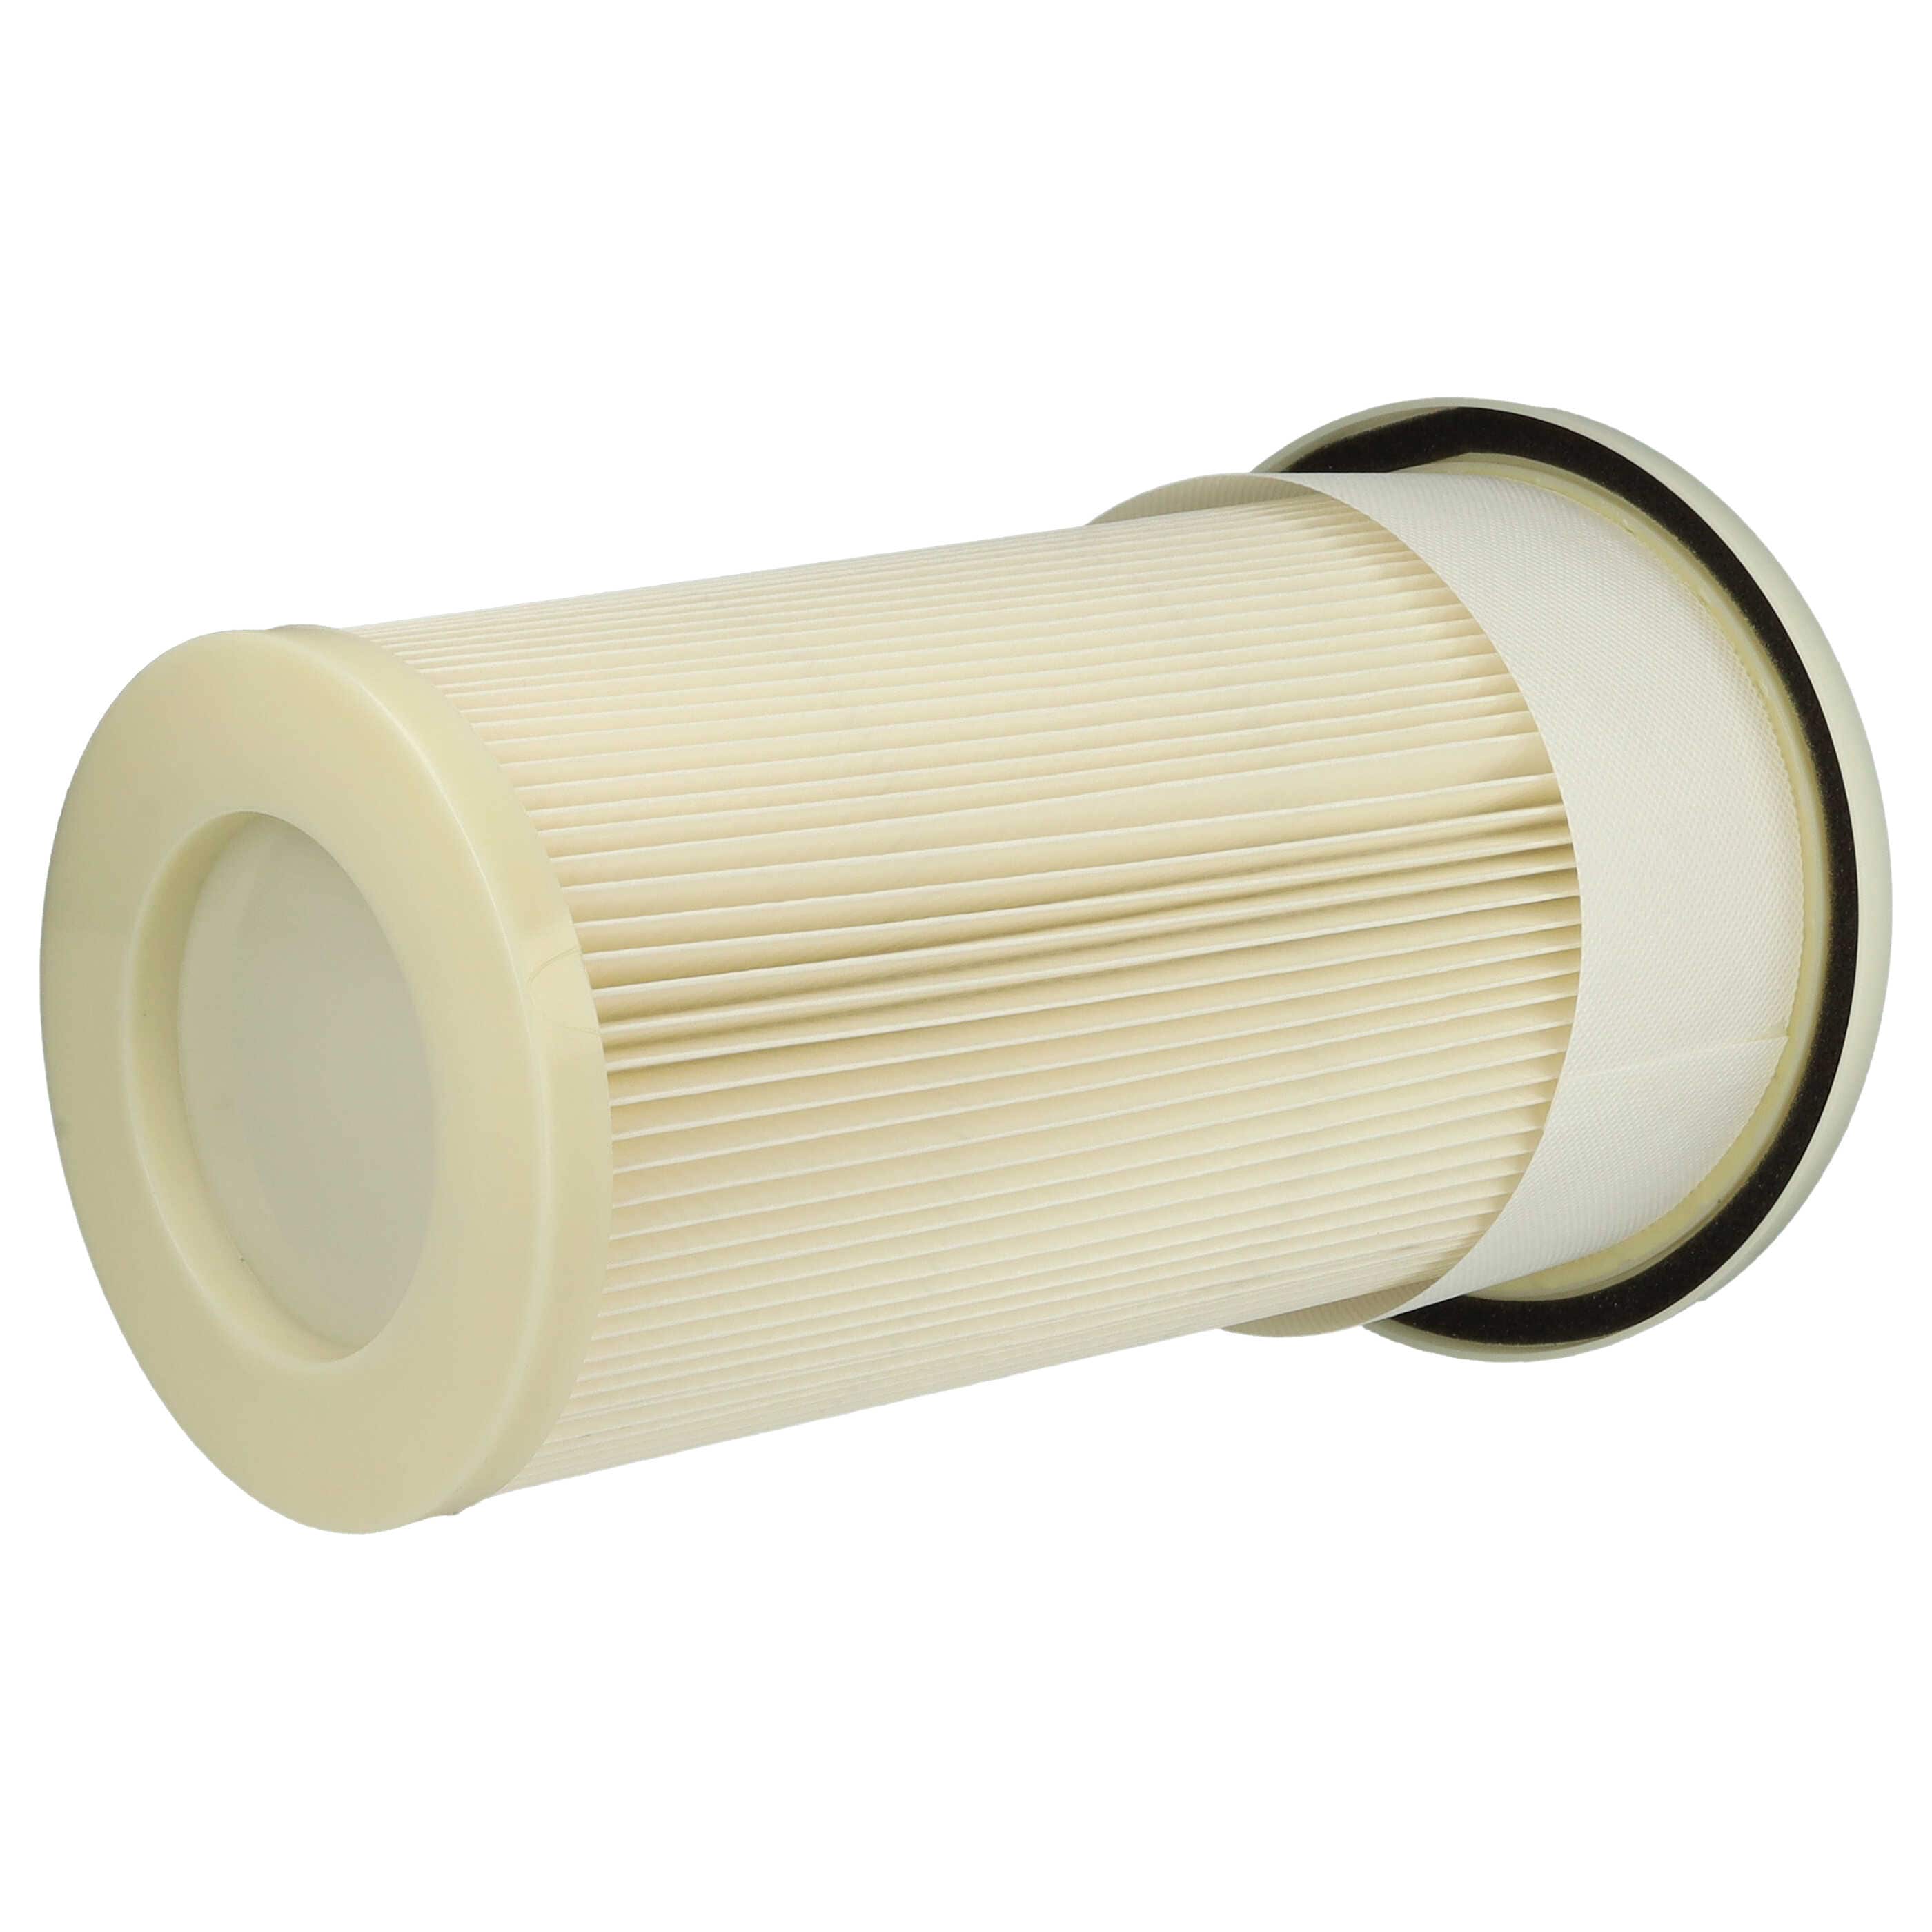 1x fine filter replaces Dustcontrol 42029 for DustcontrolVacuum Cleaner, white